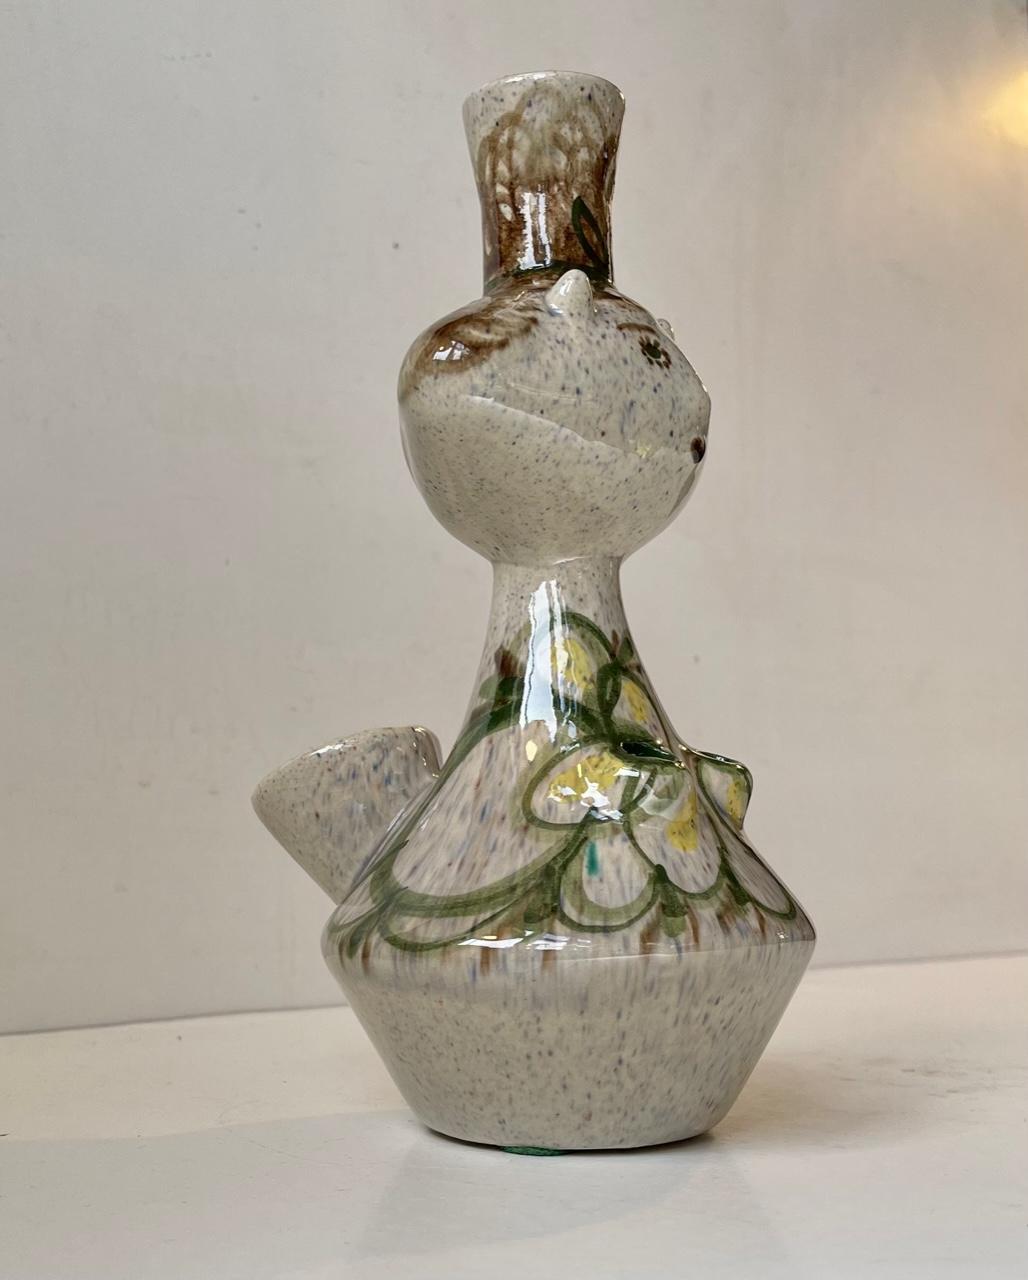 A Picasso inspired stoneware vase in the shape of a female figurine. Its a unique piece and was executed by the Danish artist, sculptor and ceramist Paul Nyhuus (1911-70) during the 1960s. It has a distinct naive styling and features 4 holes for